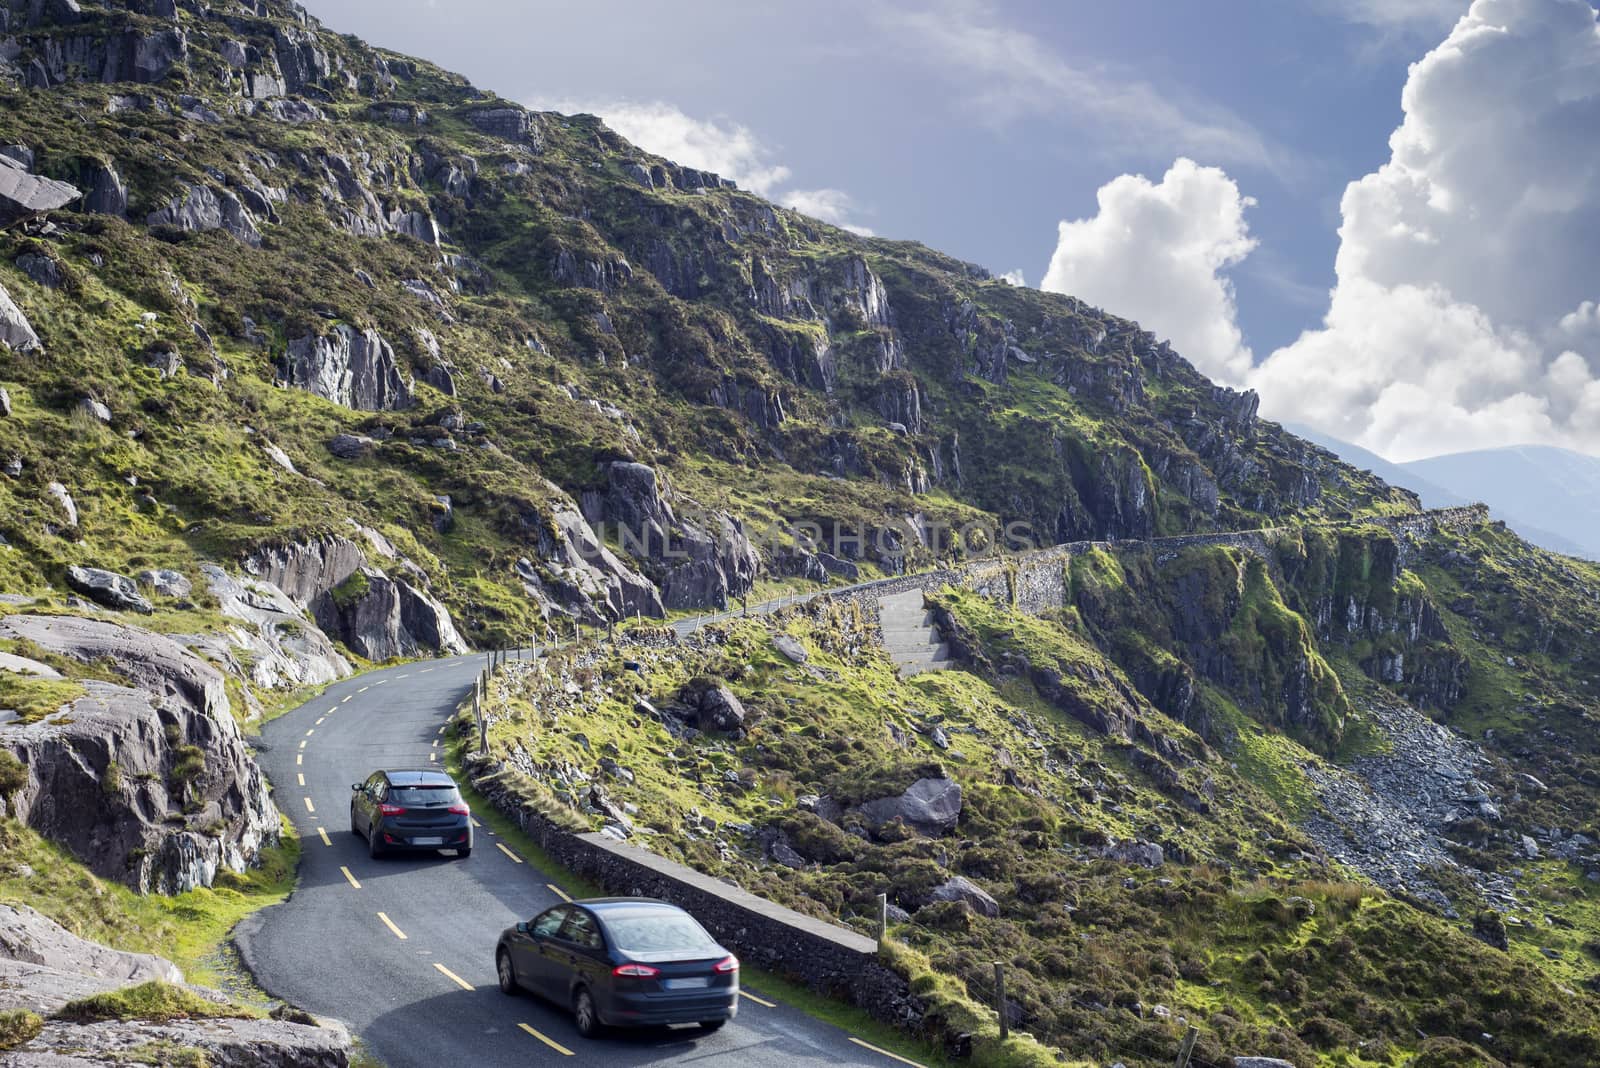 mountains and cliff road traffic at the conor pas by morrbyte